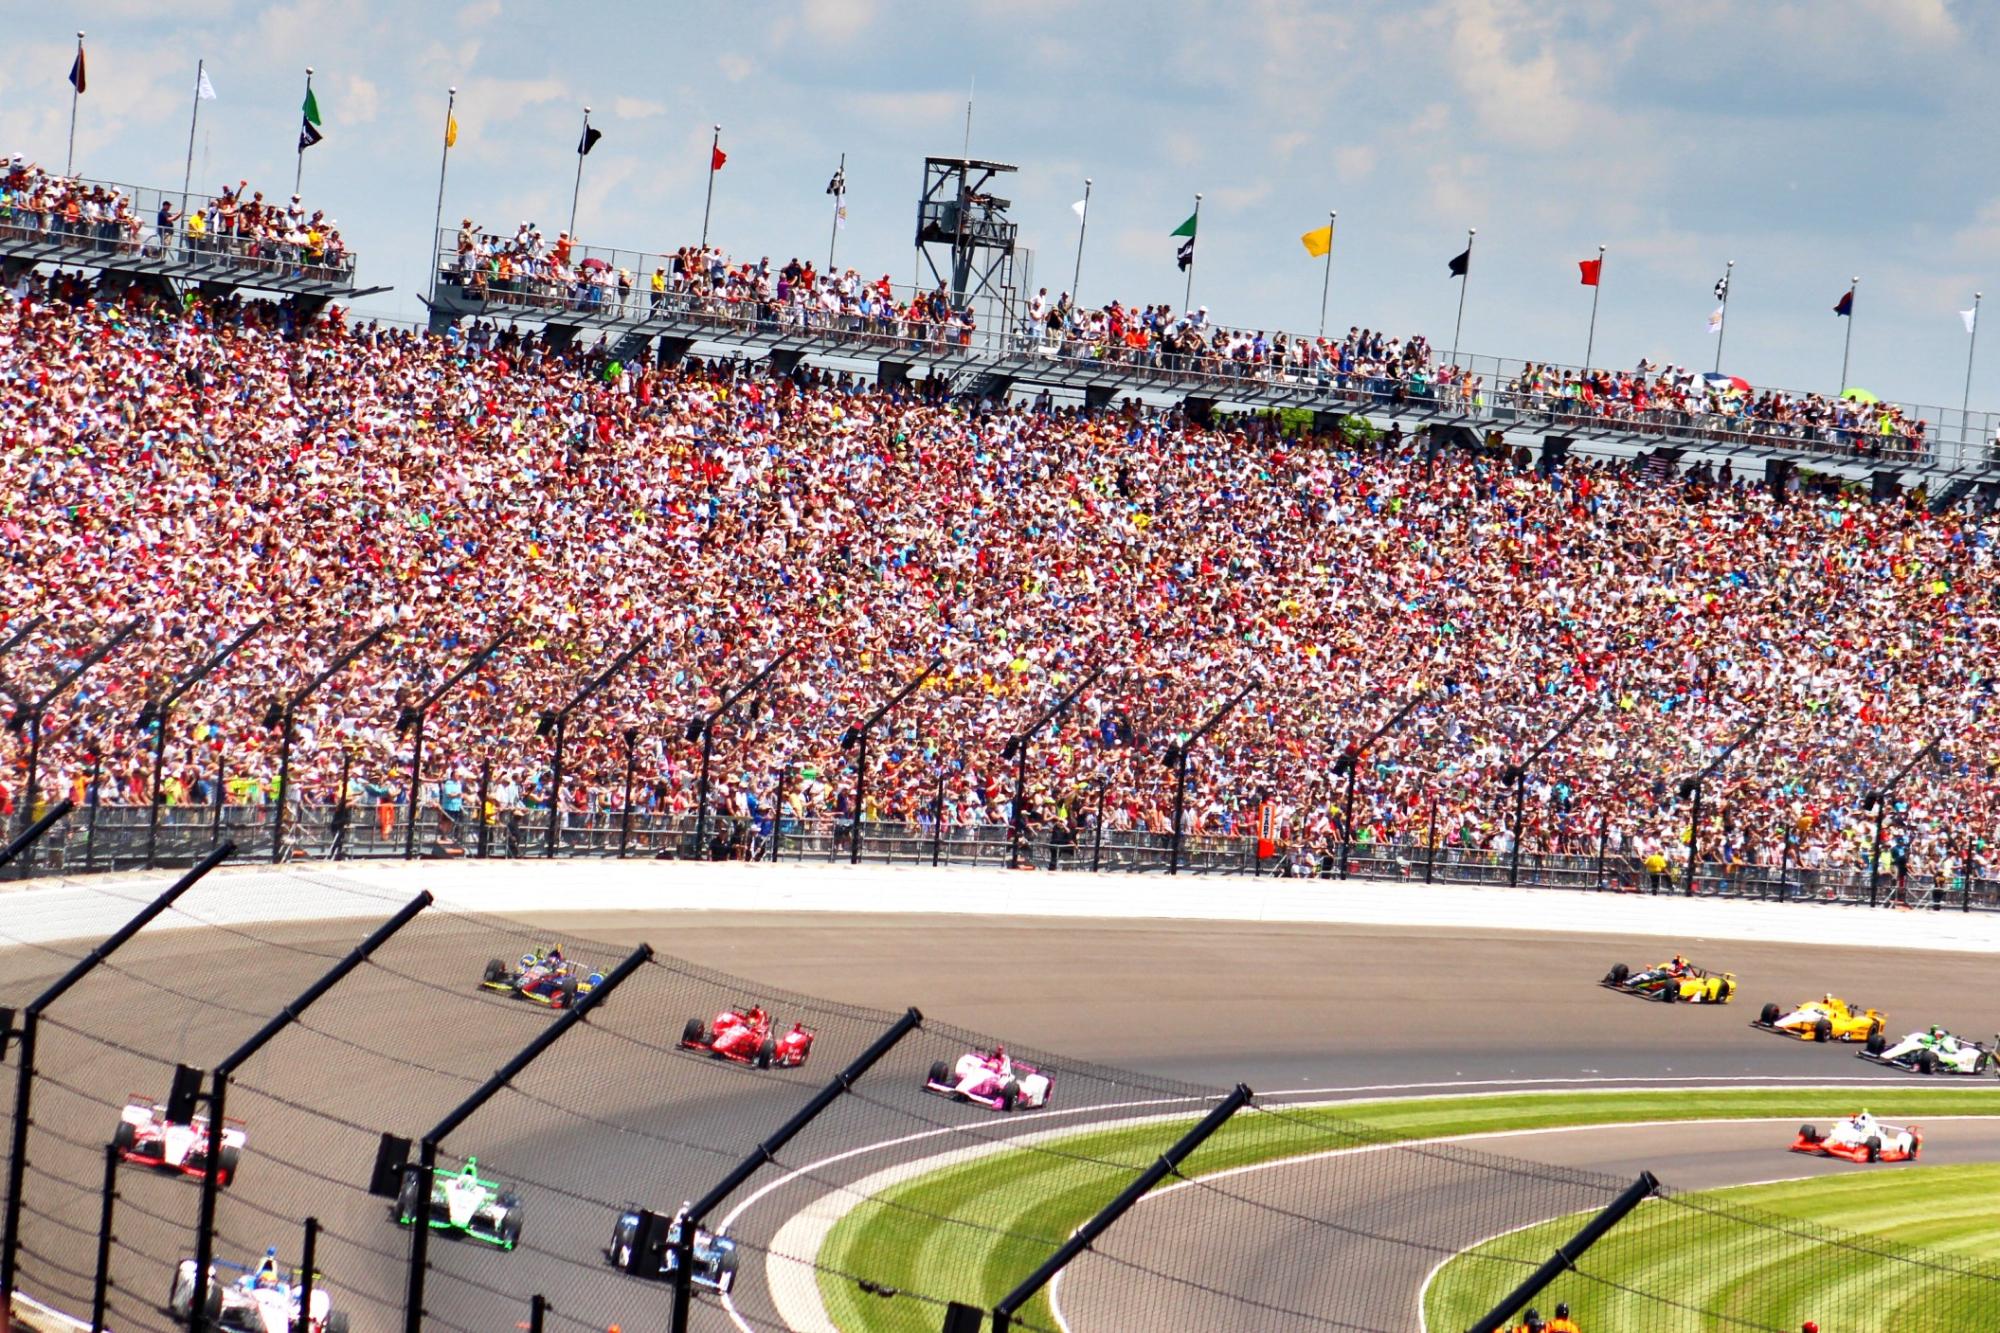 The Indianapolis Motor Speedway welcomes legions of adoring fans to its famous track.